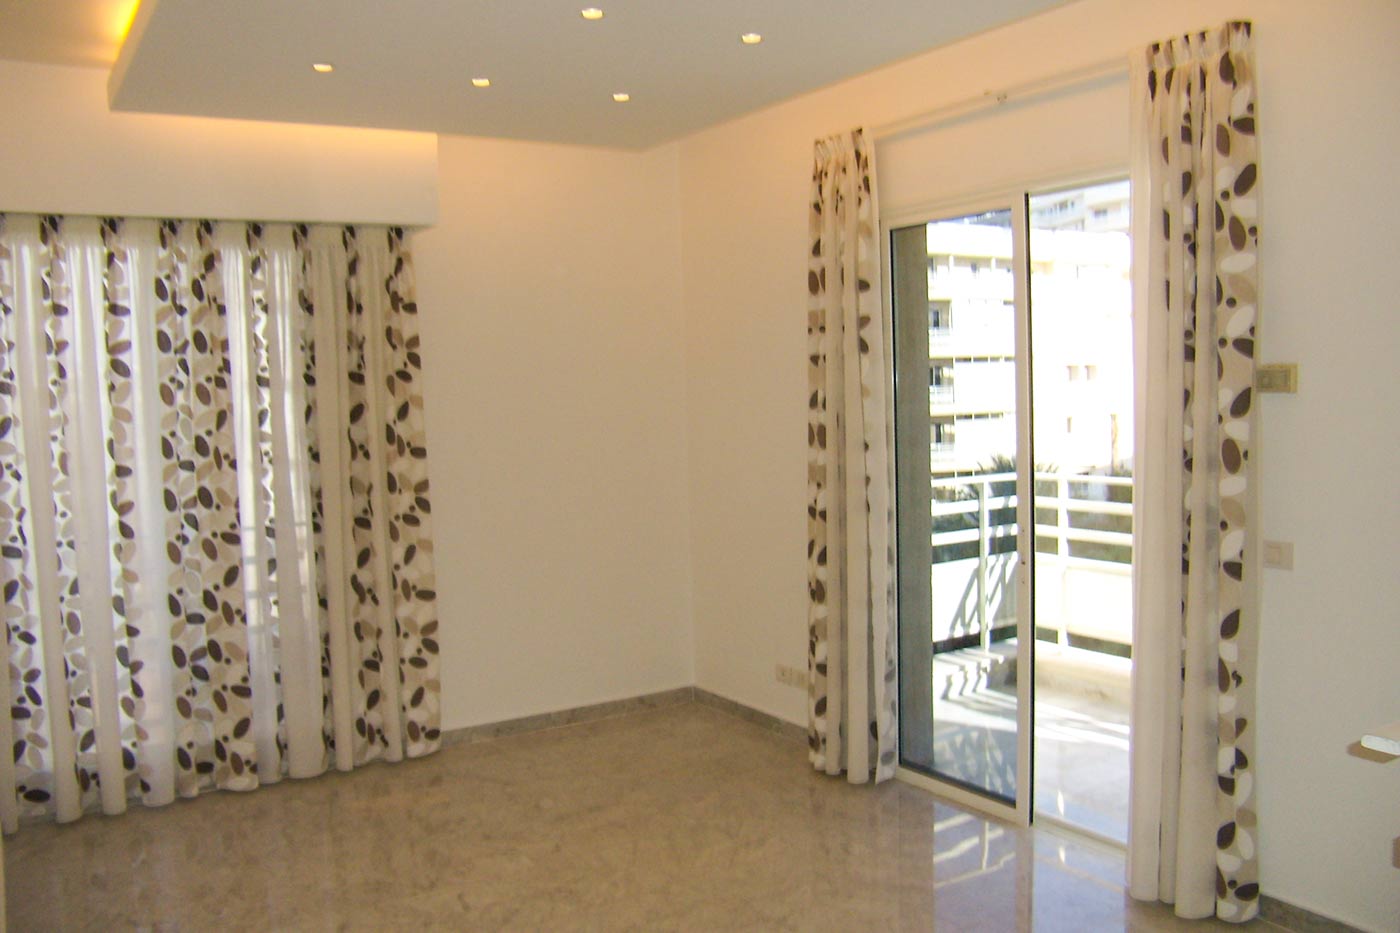 Jaber Residence - Balcony Door with Curtains